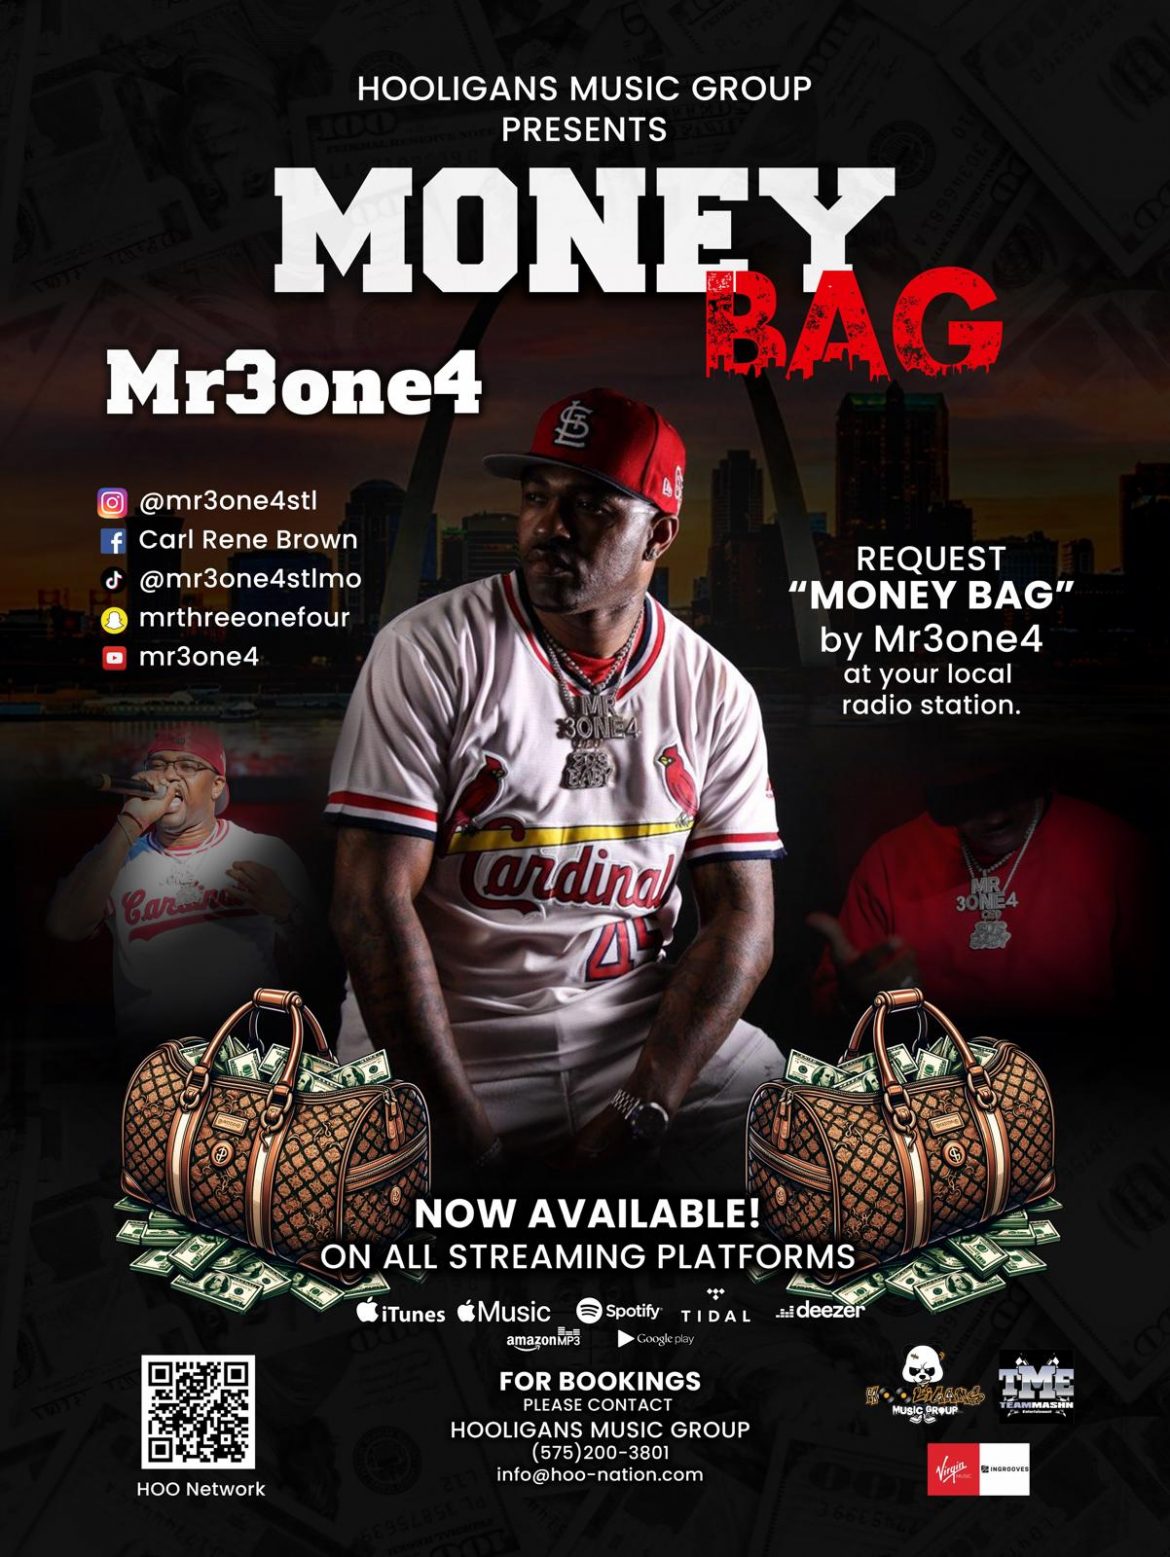 Carl Brown’s Latest Hit “Money Bag”: A Testament to His Musical Roots and Passion